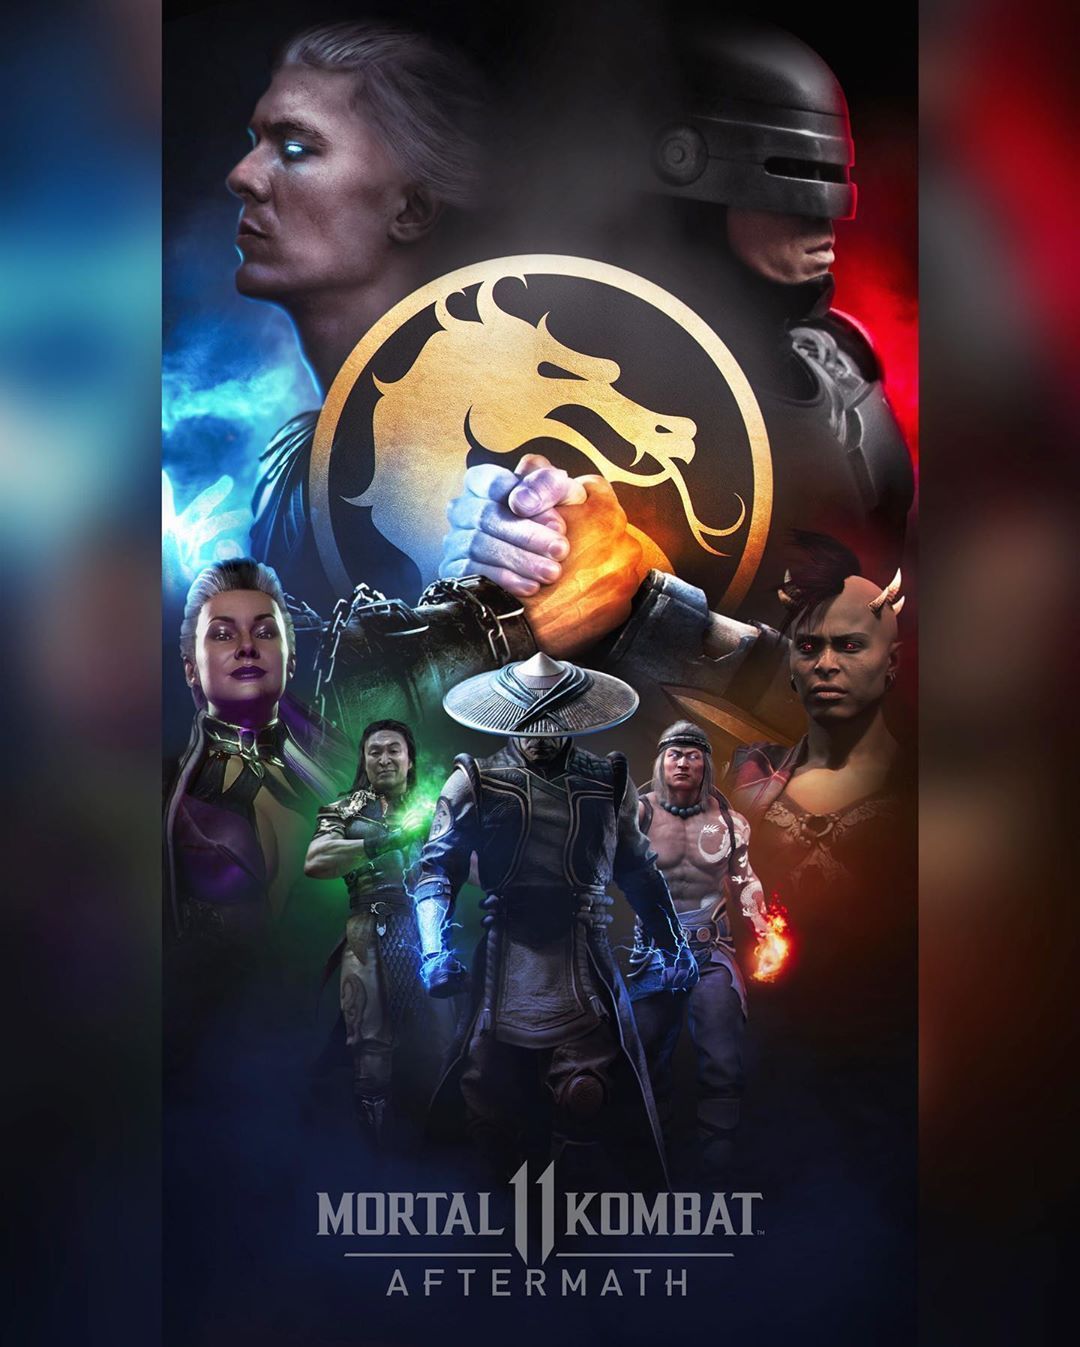 Mizuri on Instagram: “Who's your favourite character in this poster ? Mortal Kombat Aftermat. Mortal kombat characters, Mortal kombat, Mortal kombat x wallpaper